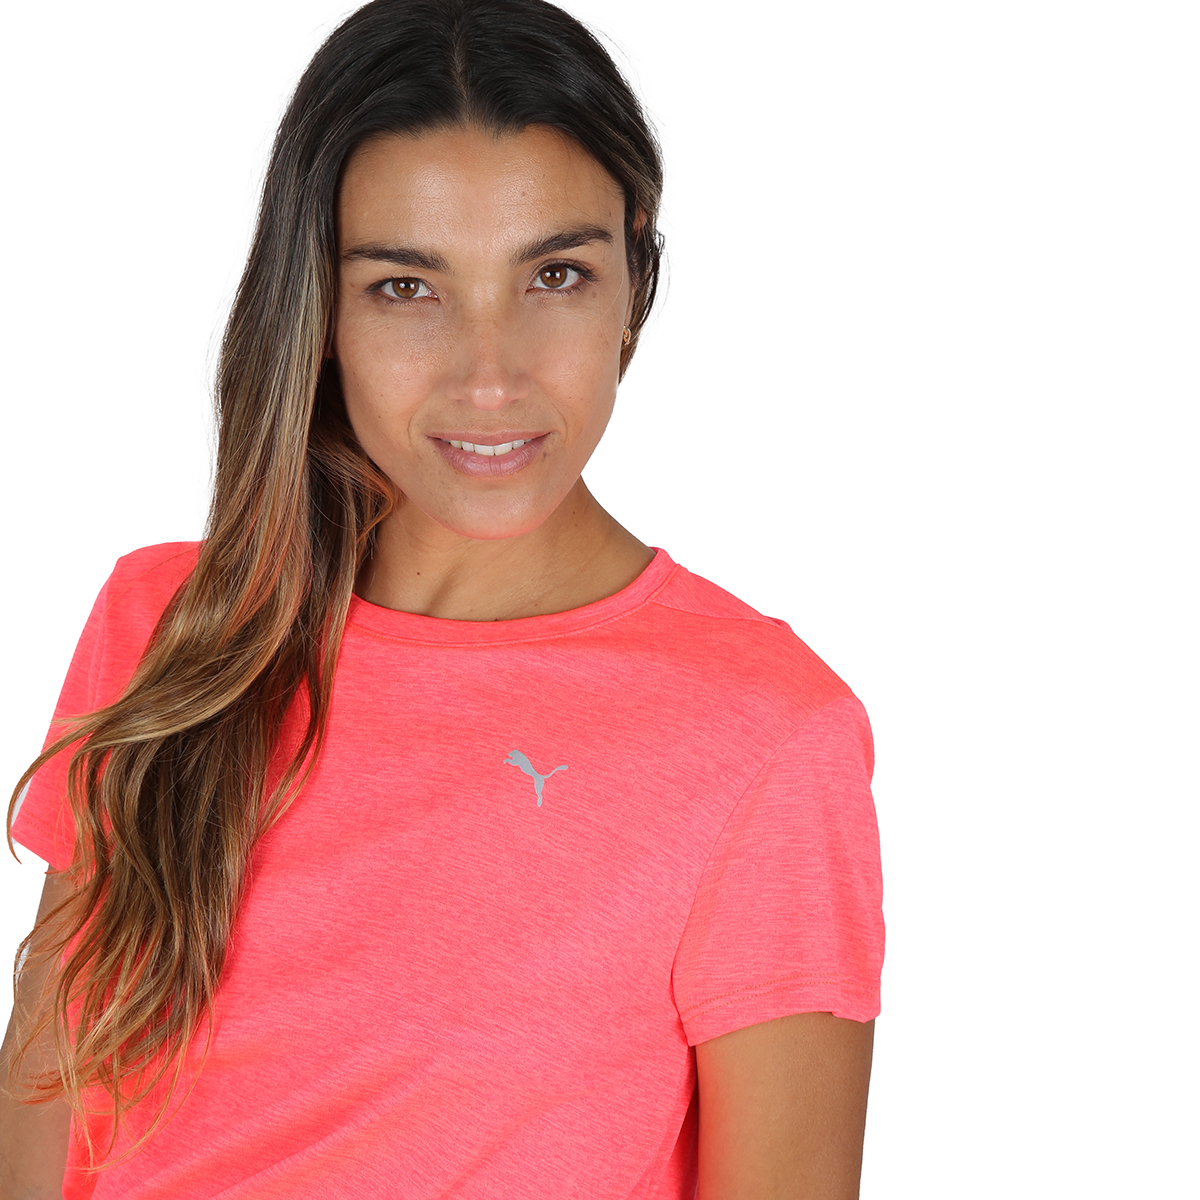 Remera Puma Run Favorite Heather Ss Mujer,  image number null